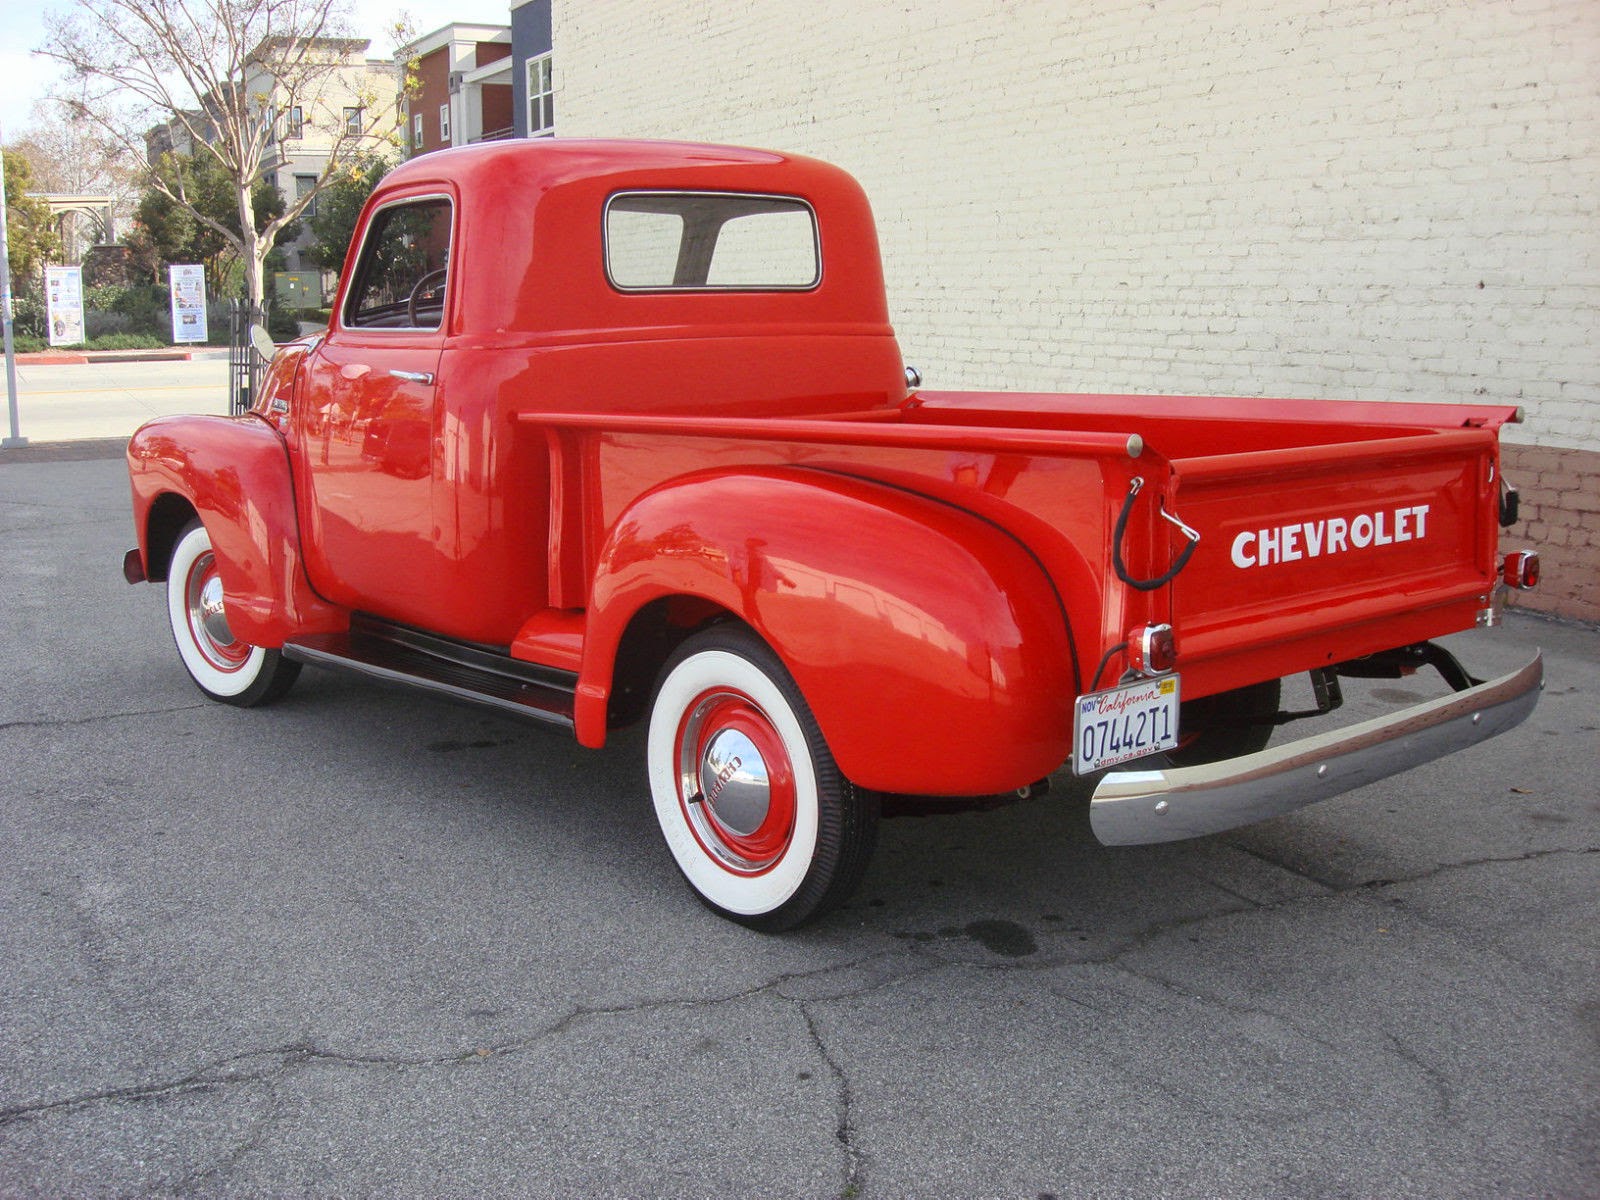 All American Classic Cars: 1950 Chevrolet 3100 Pickup Truck